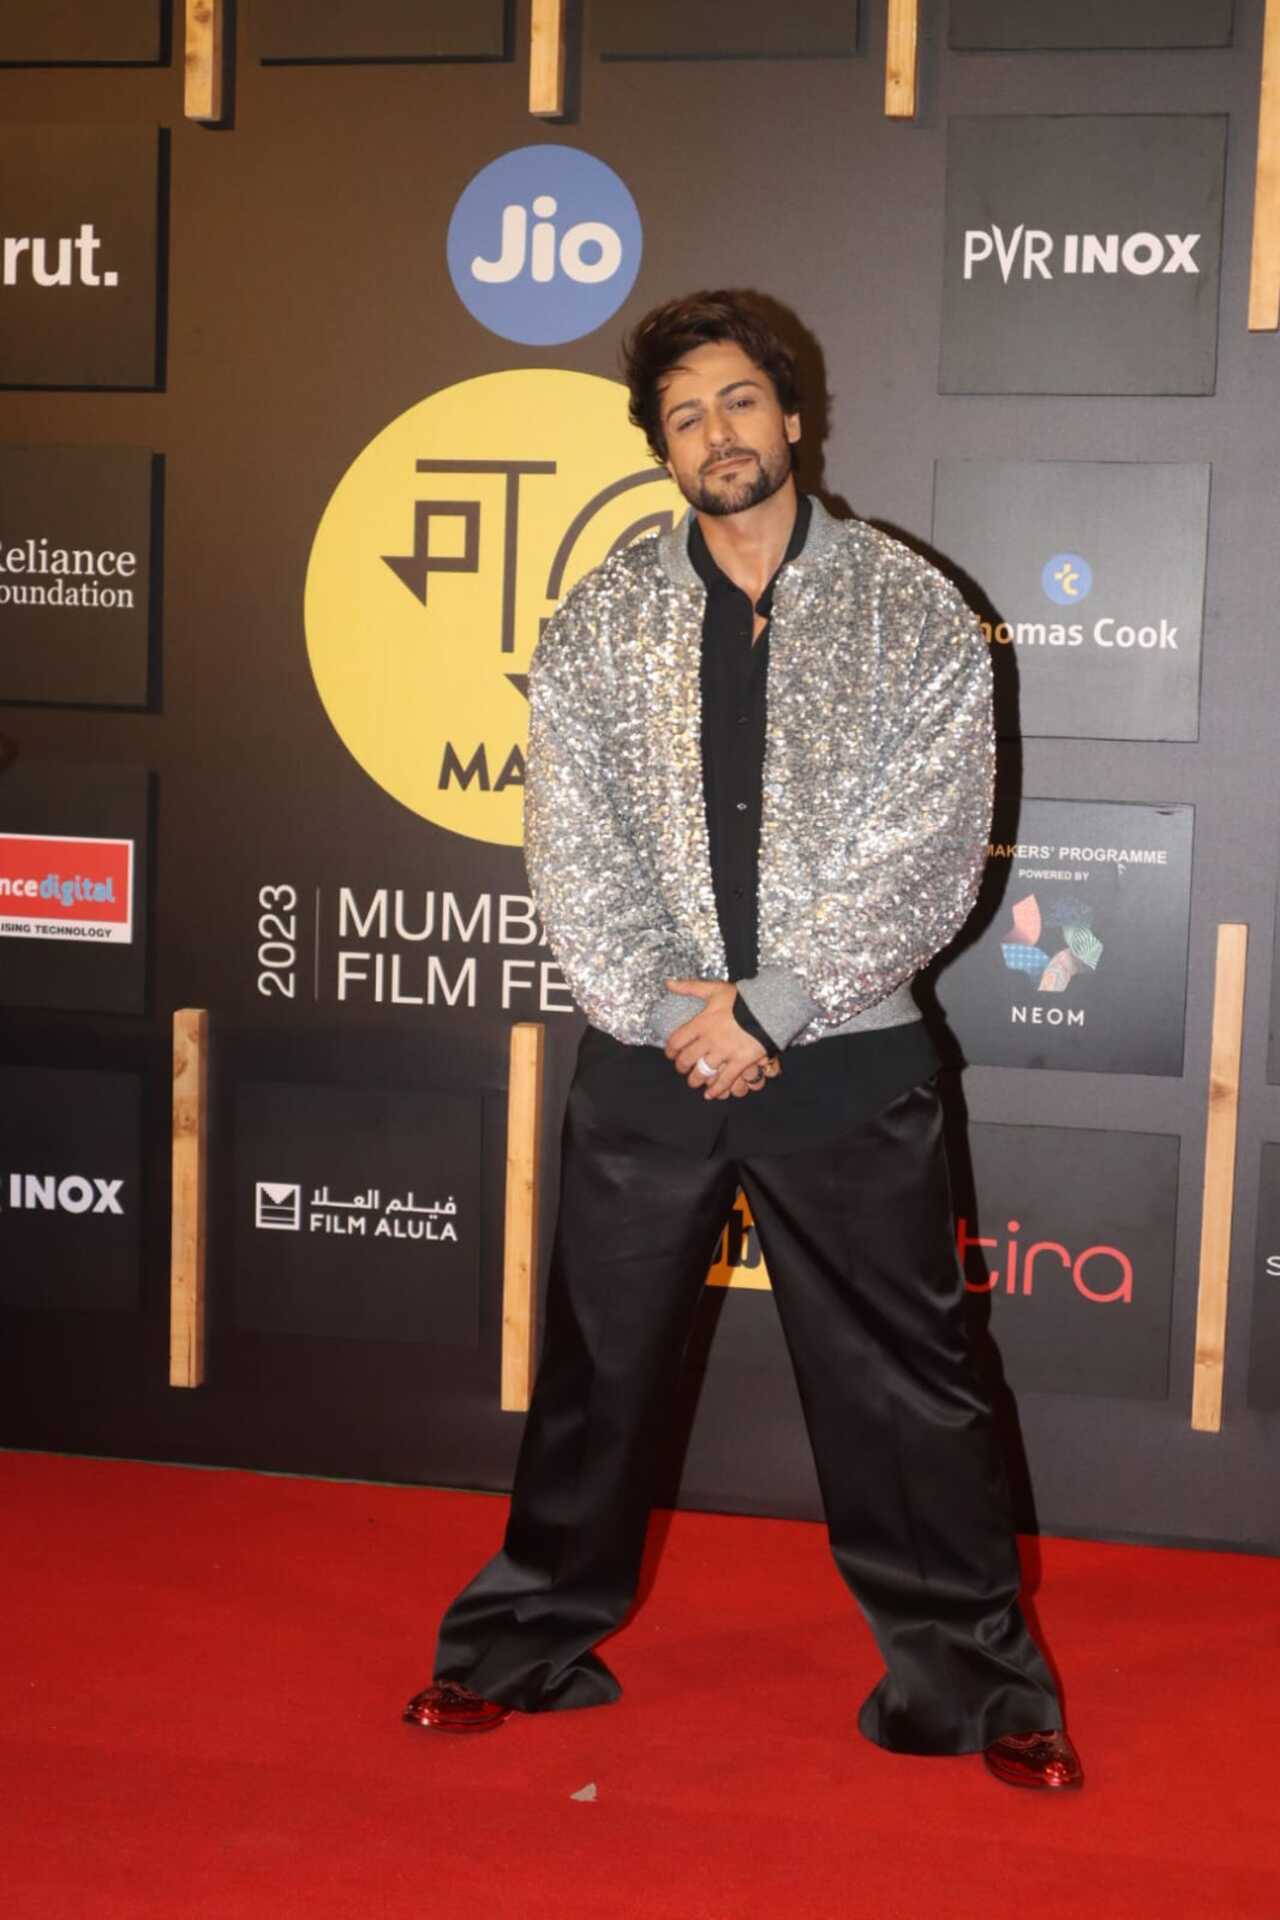 Shalin Bhanot exuded swag as he walked the red carpet in a shimmery silver jacket over his black outfit